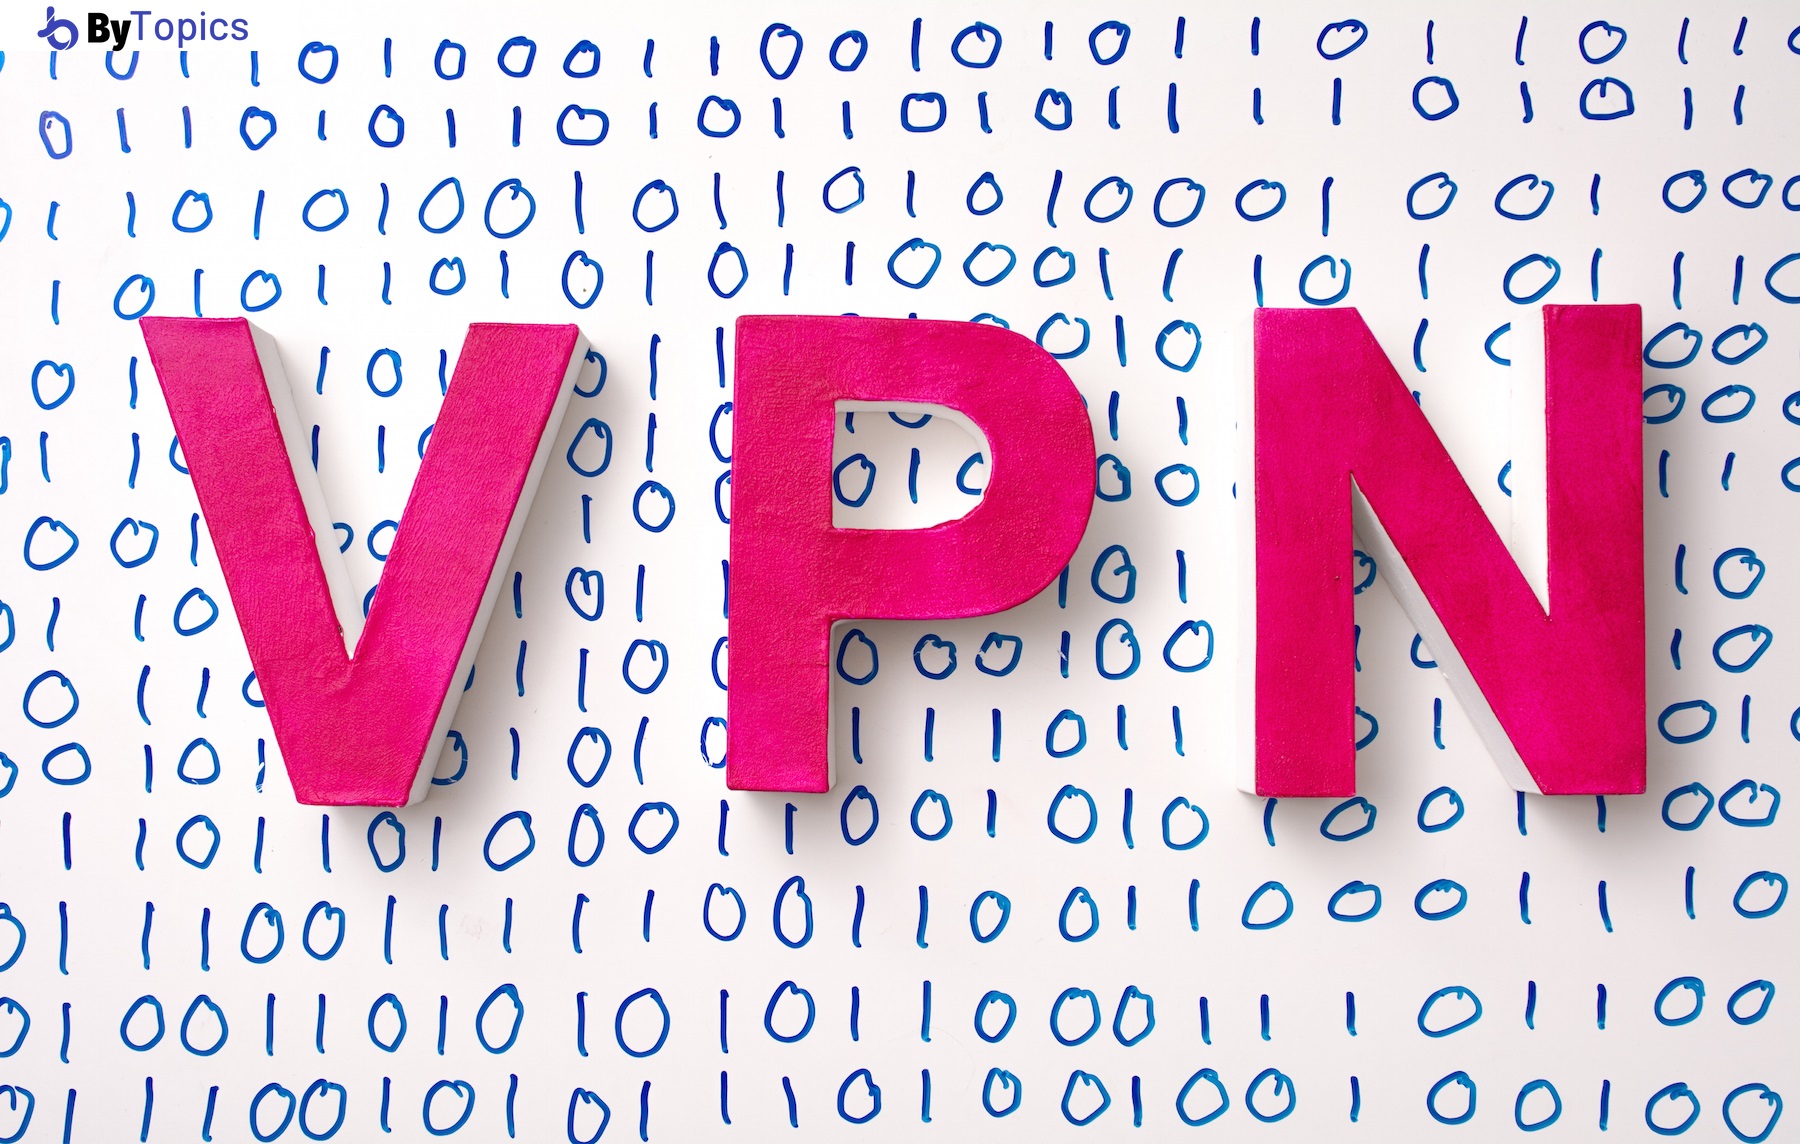 VPN Meaning and What is VPN?